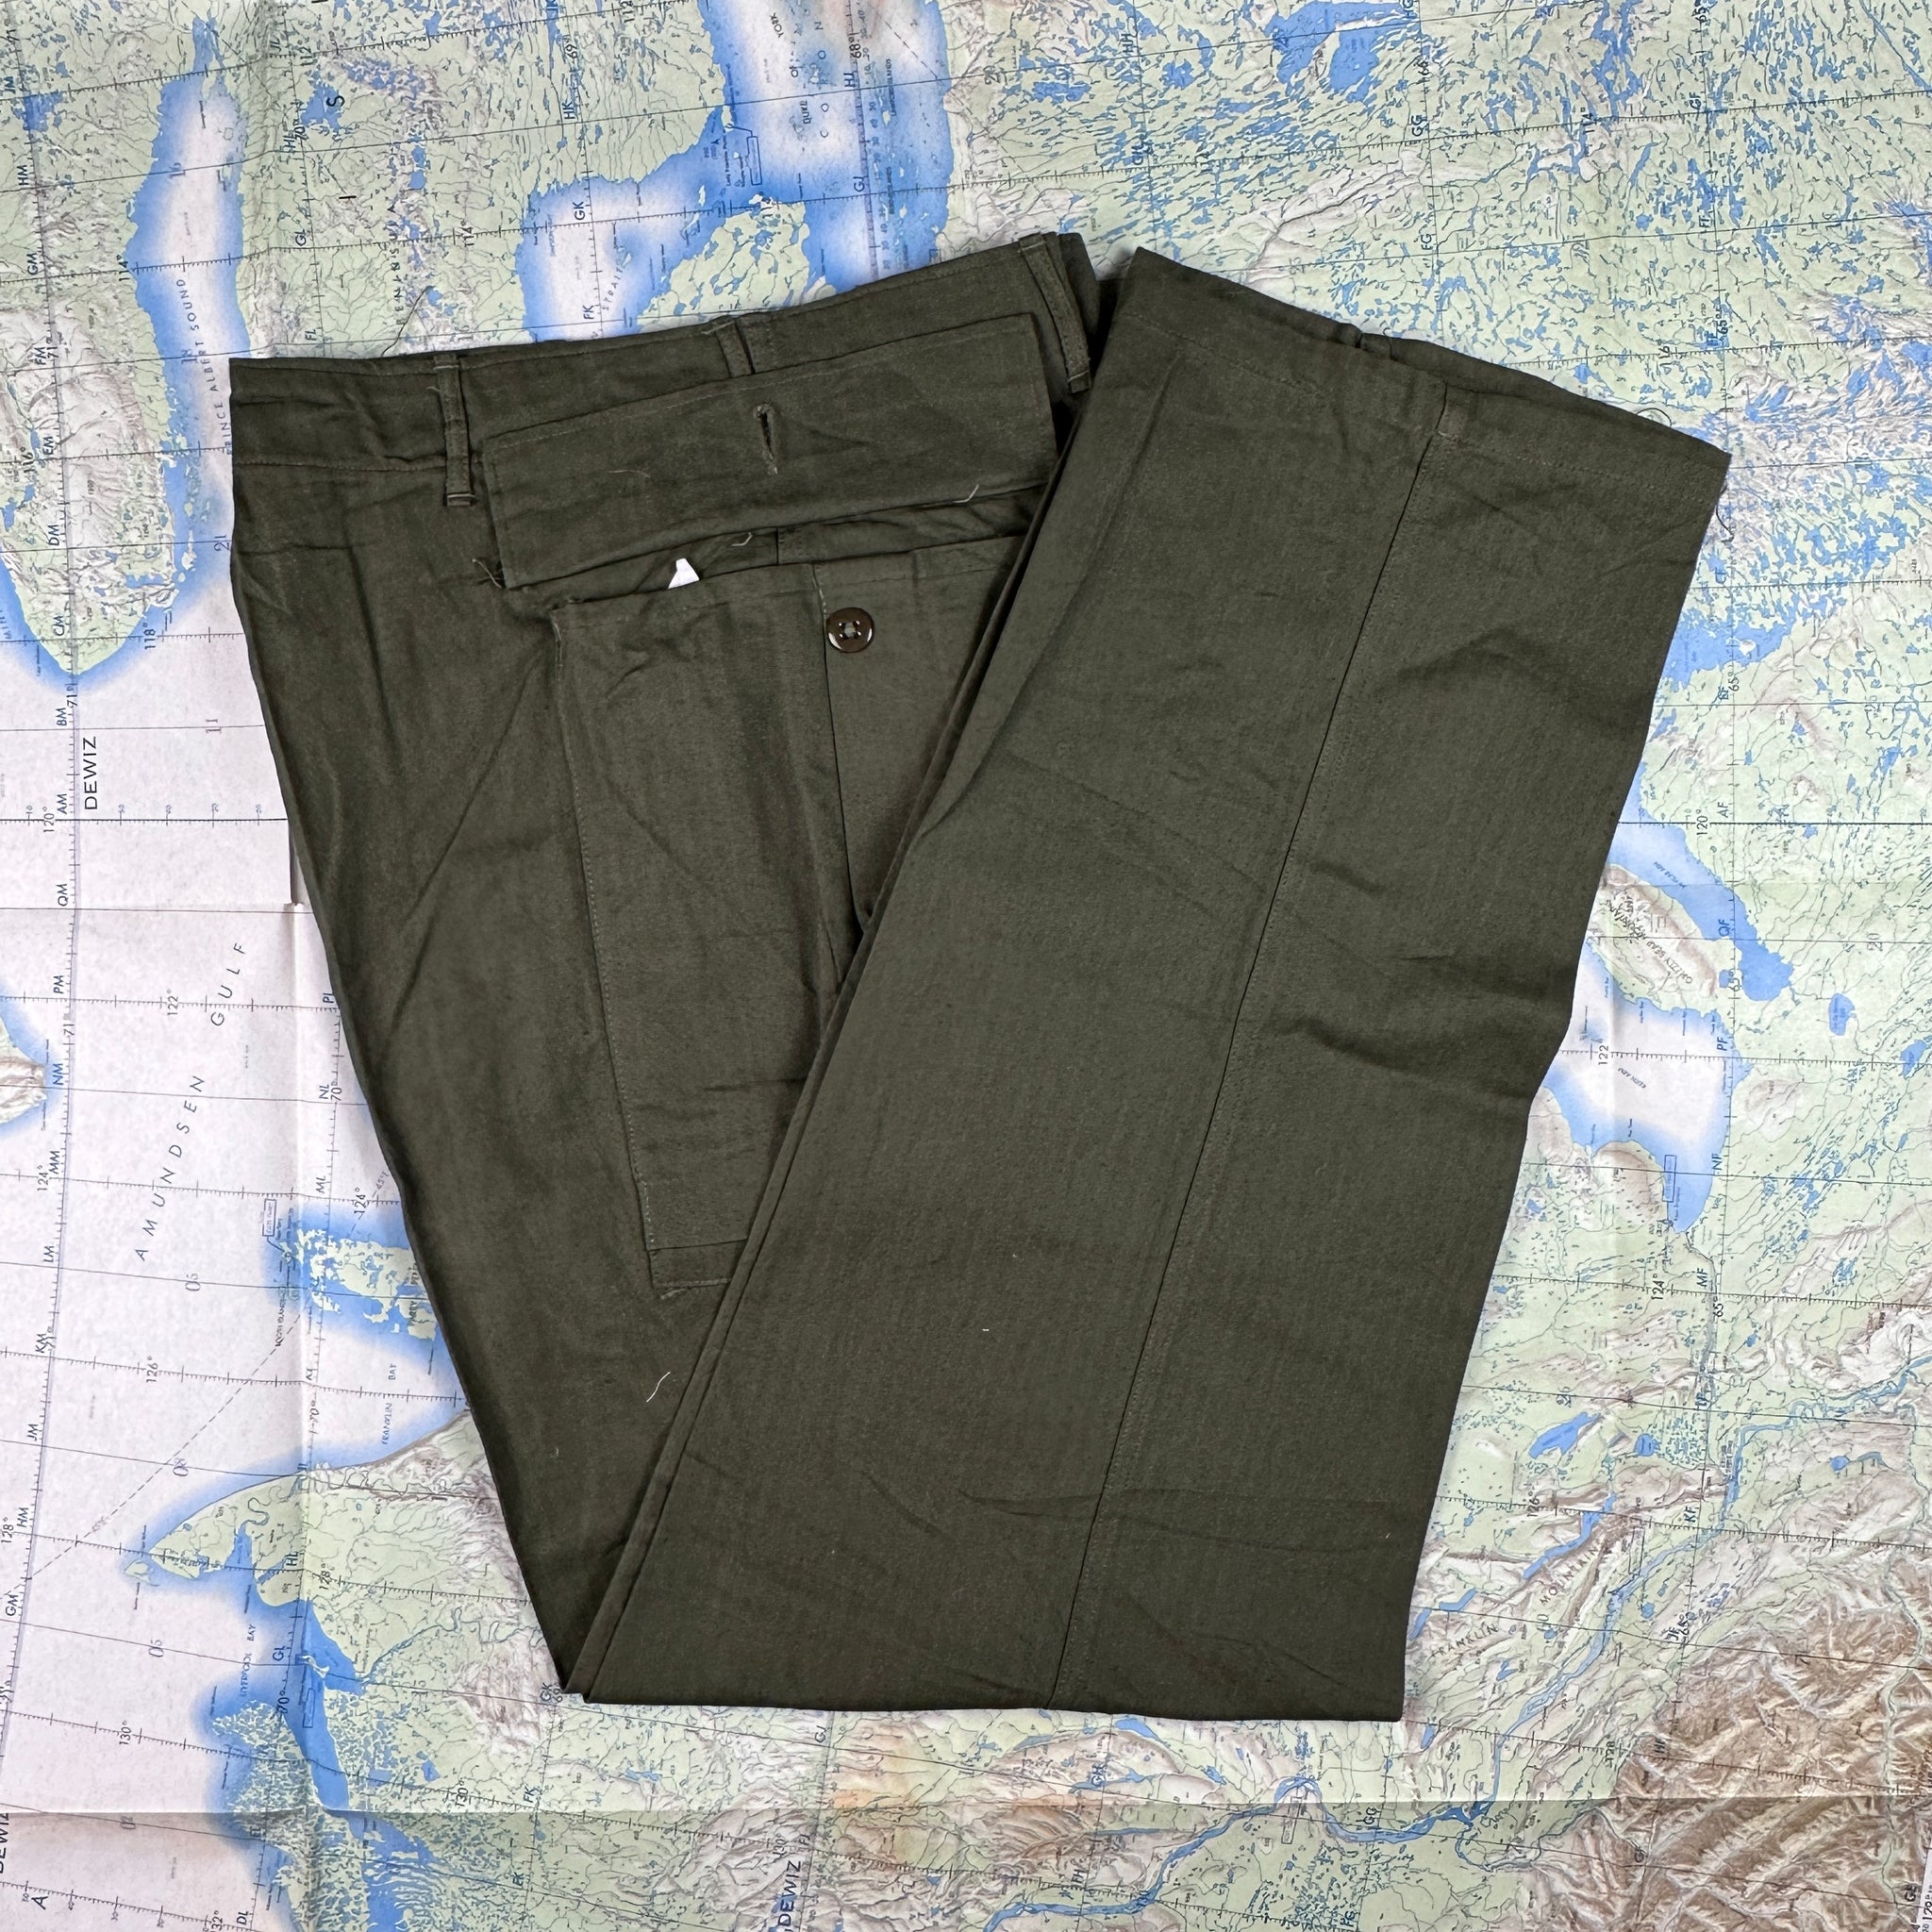 Deadstock US Army WW2 P43 HBT Fatigue Pants – The Major's Tailor